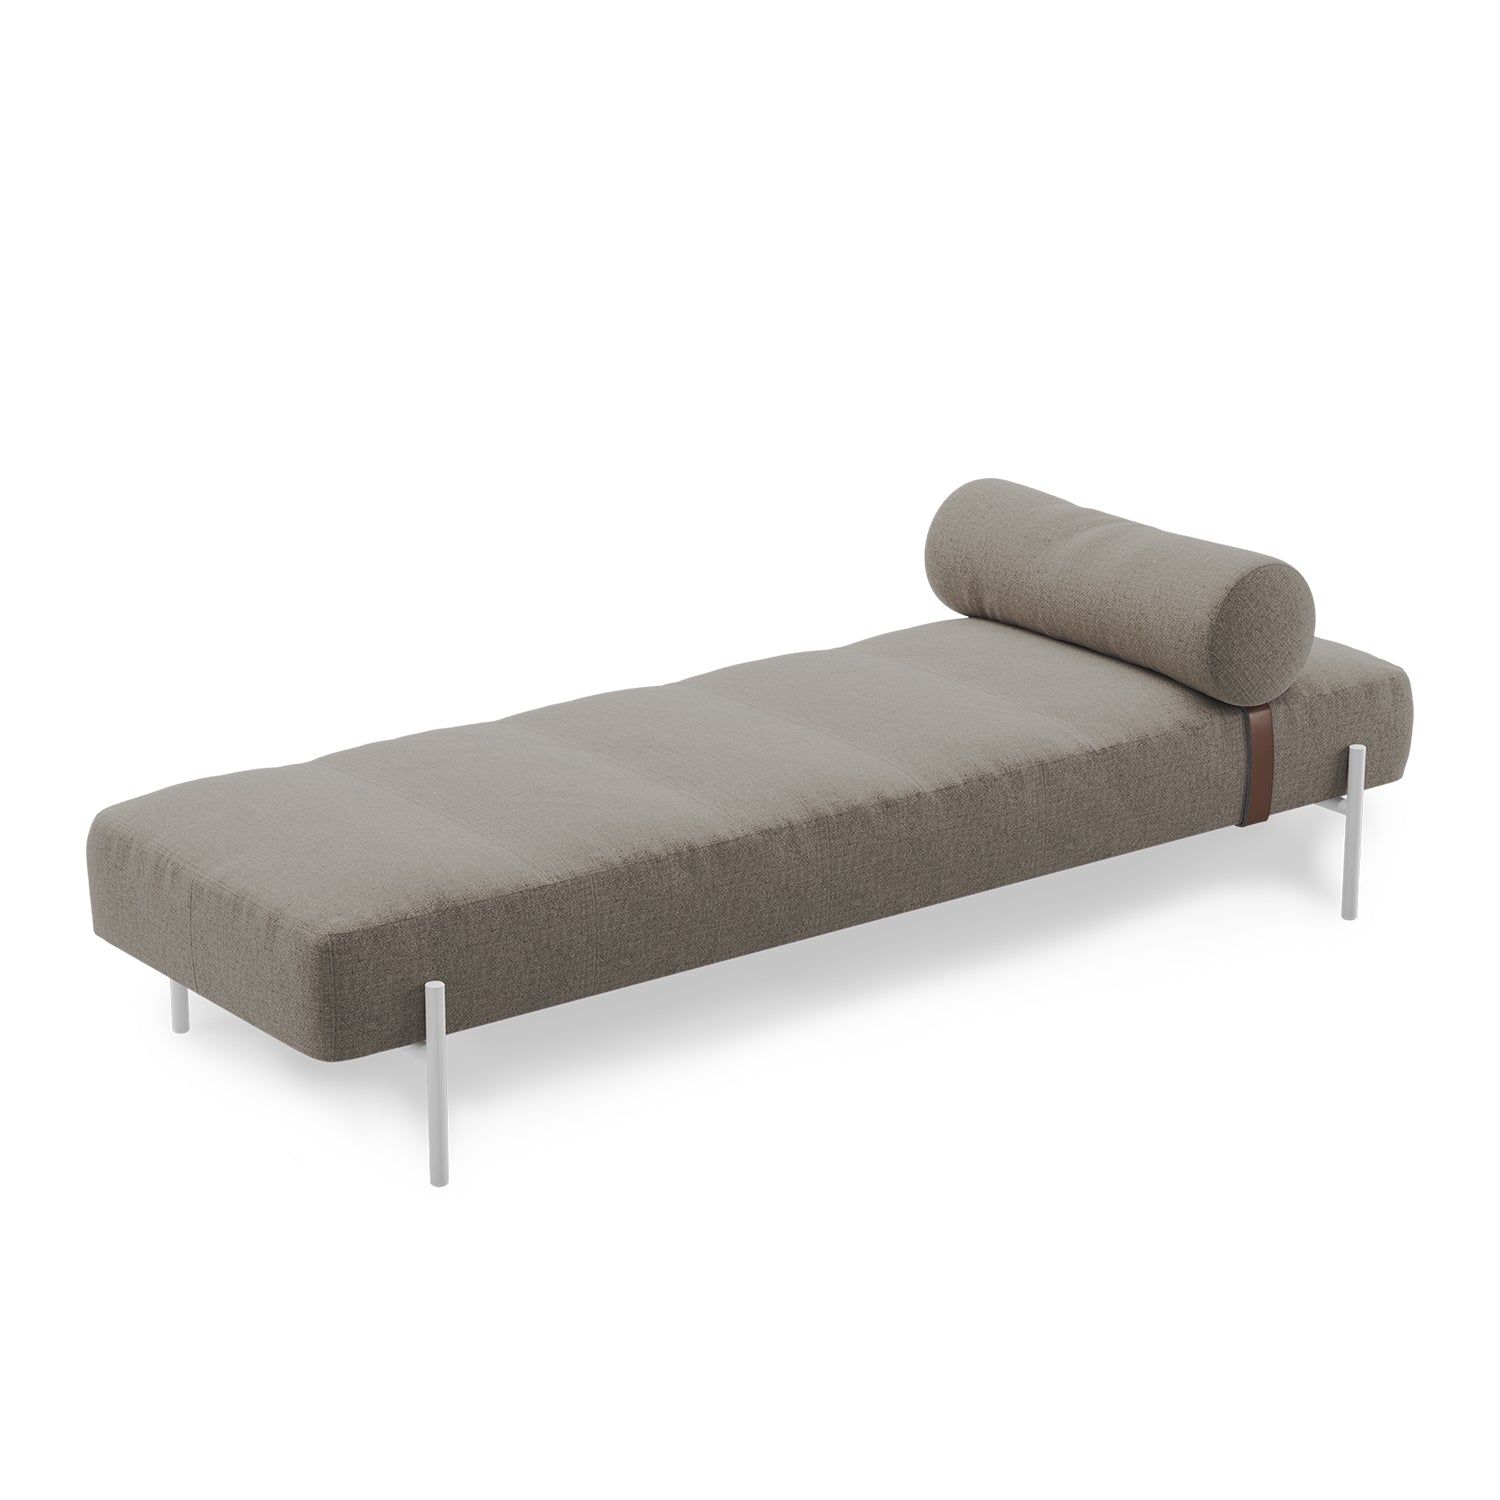 Northern Daybe Daybed in brusvik 66 and White legs